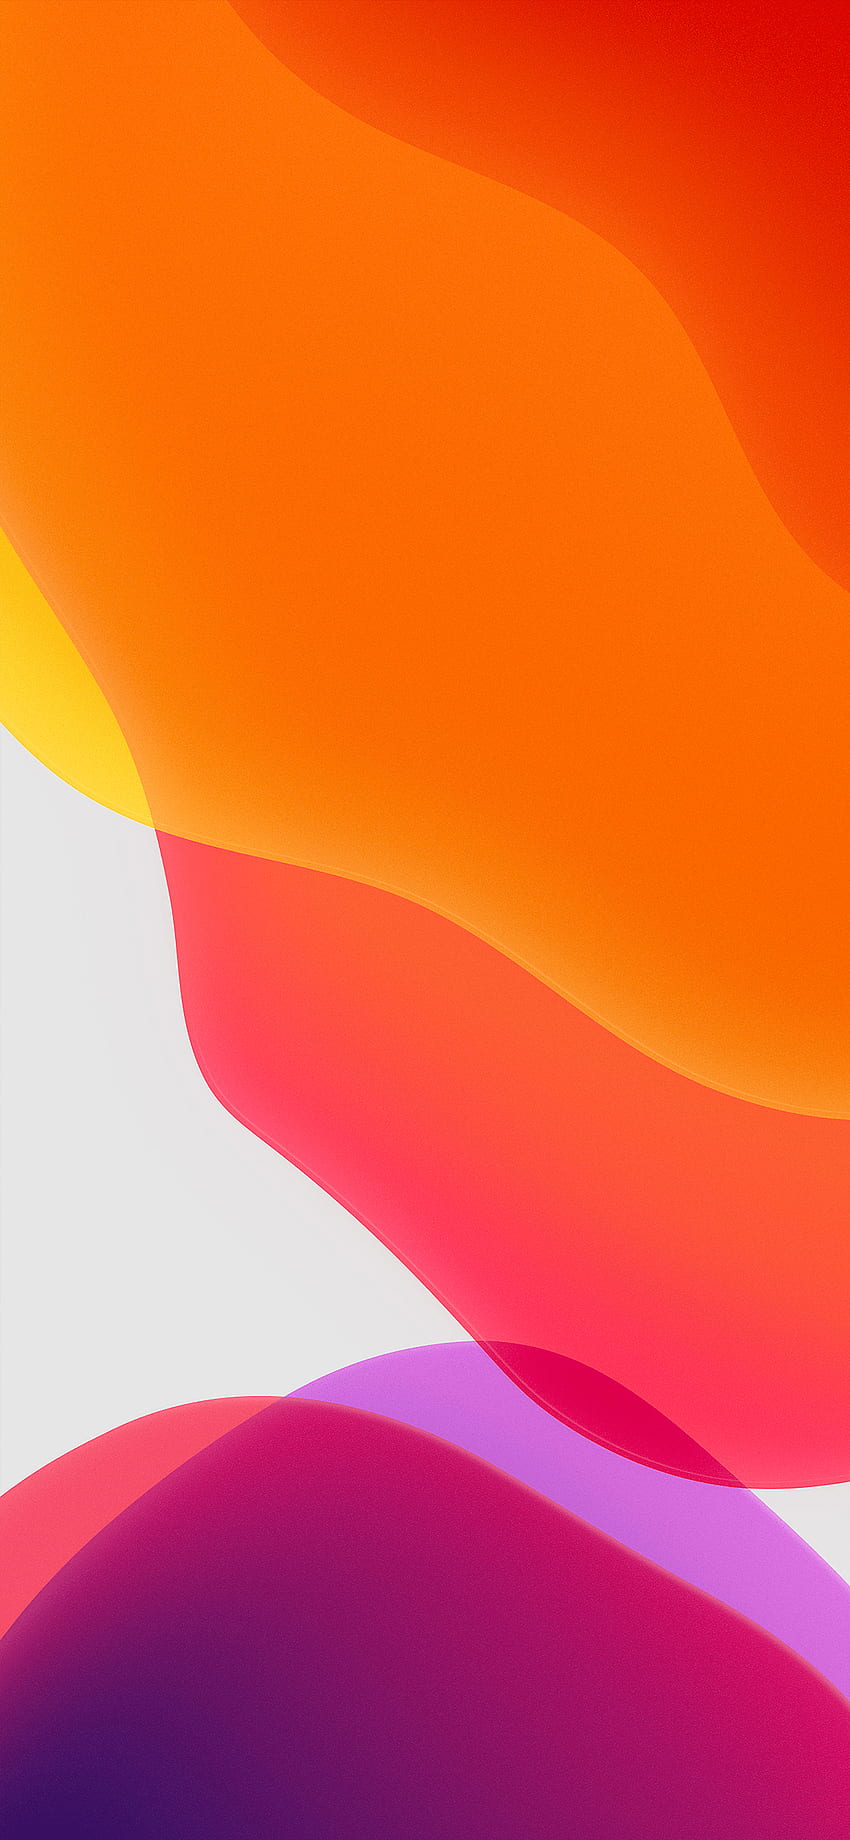 30 Free Wallpapers for Your iPhone 6s65s5